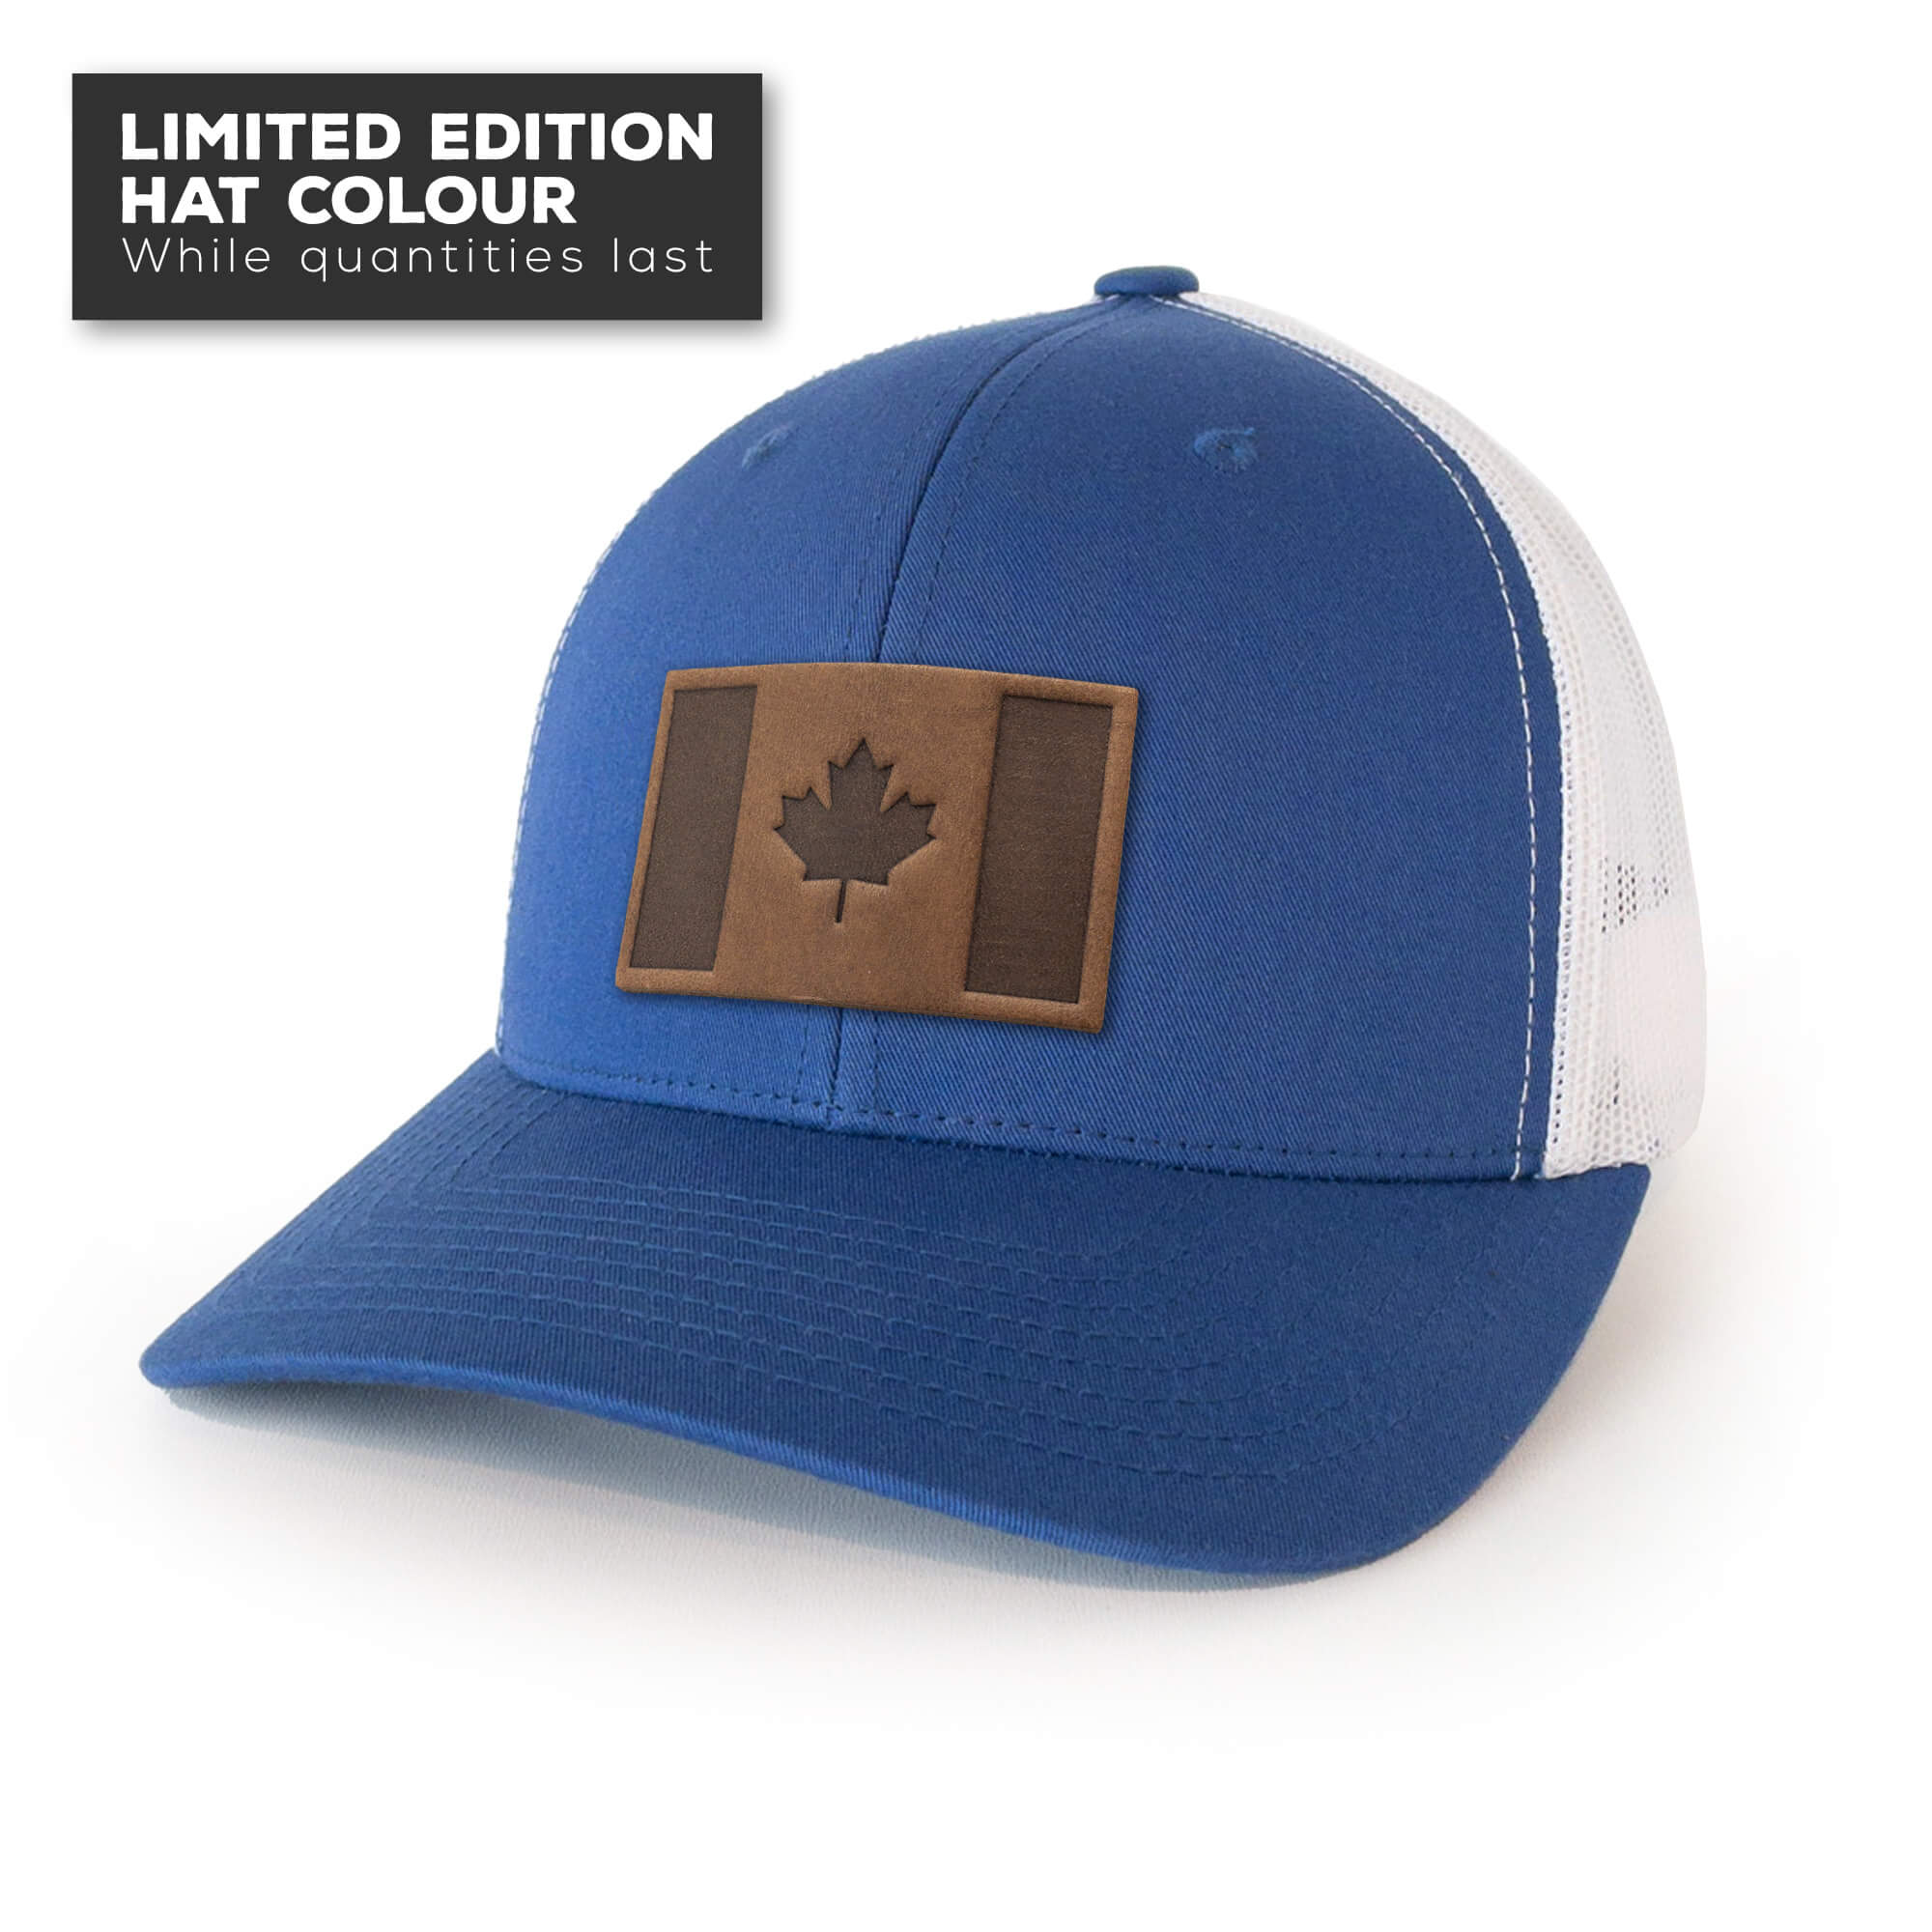 Royal Blue trucker hat with full-grain leather patch of Canada Flag